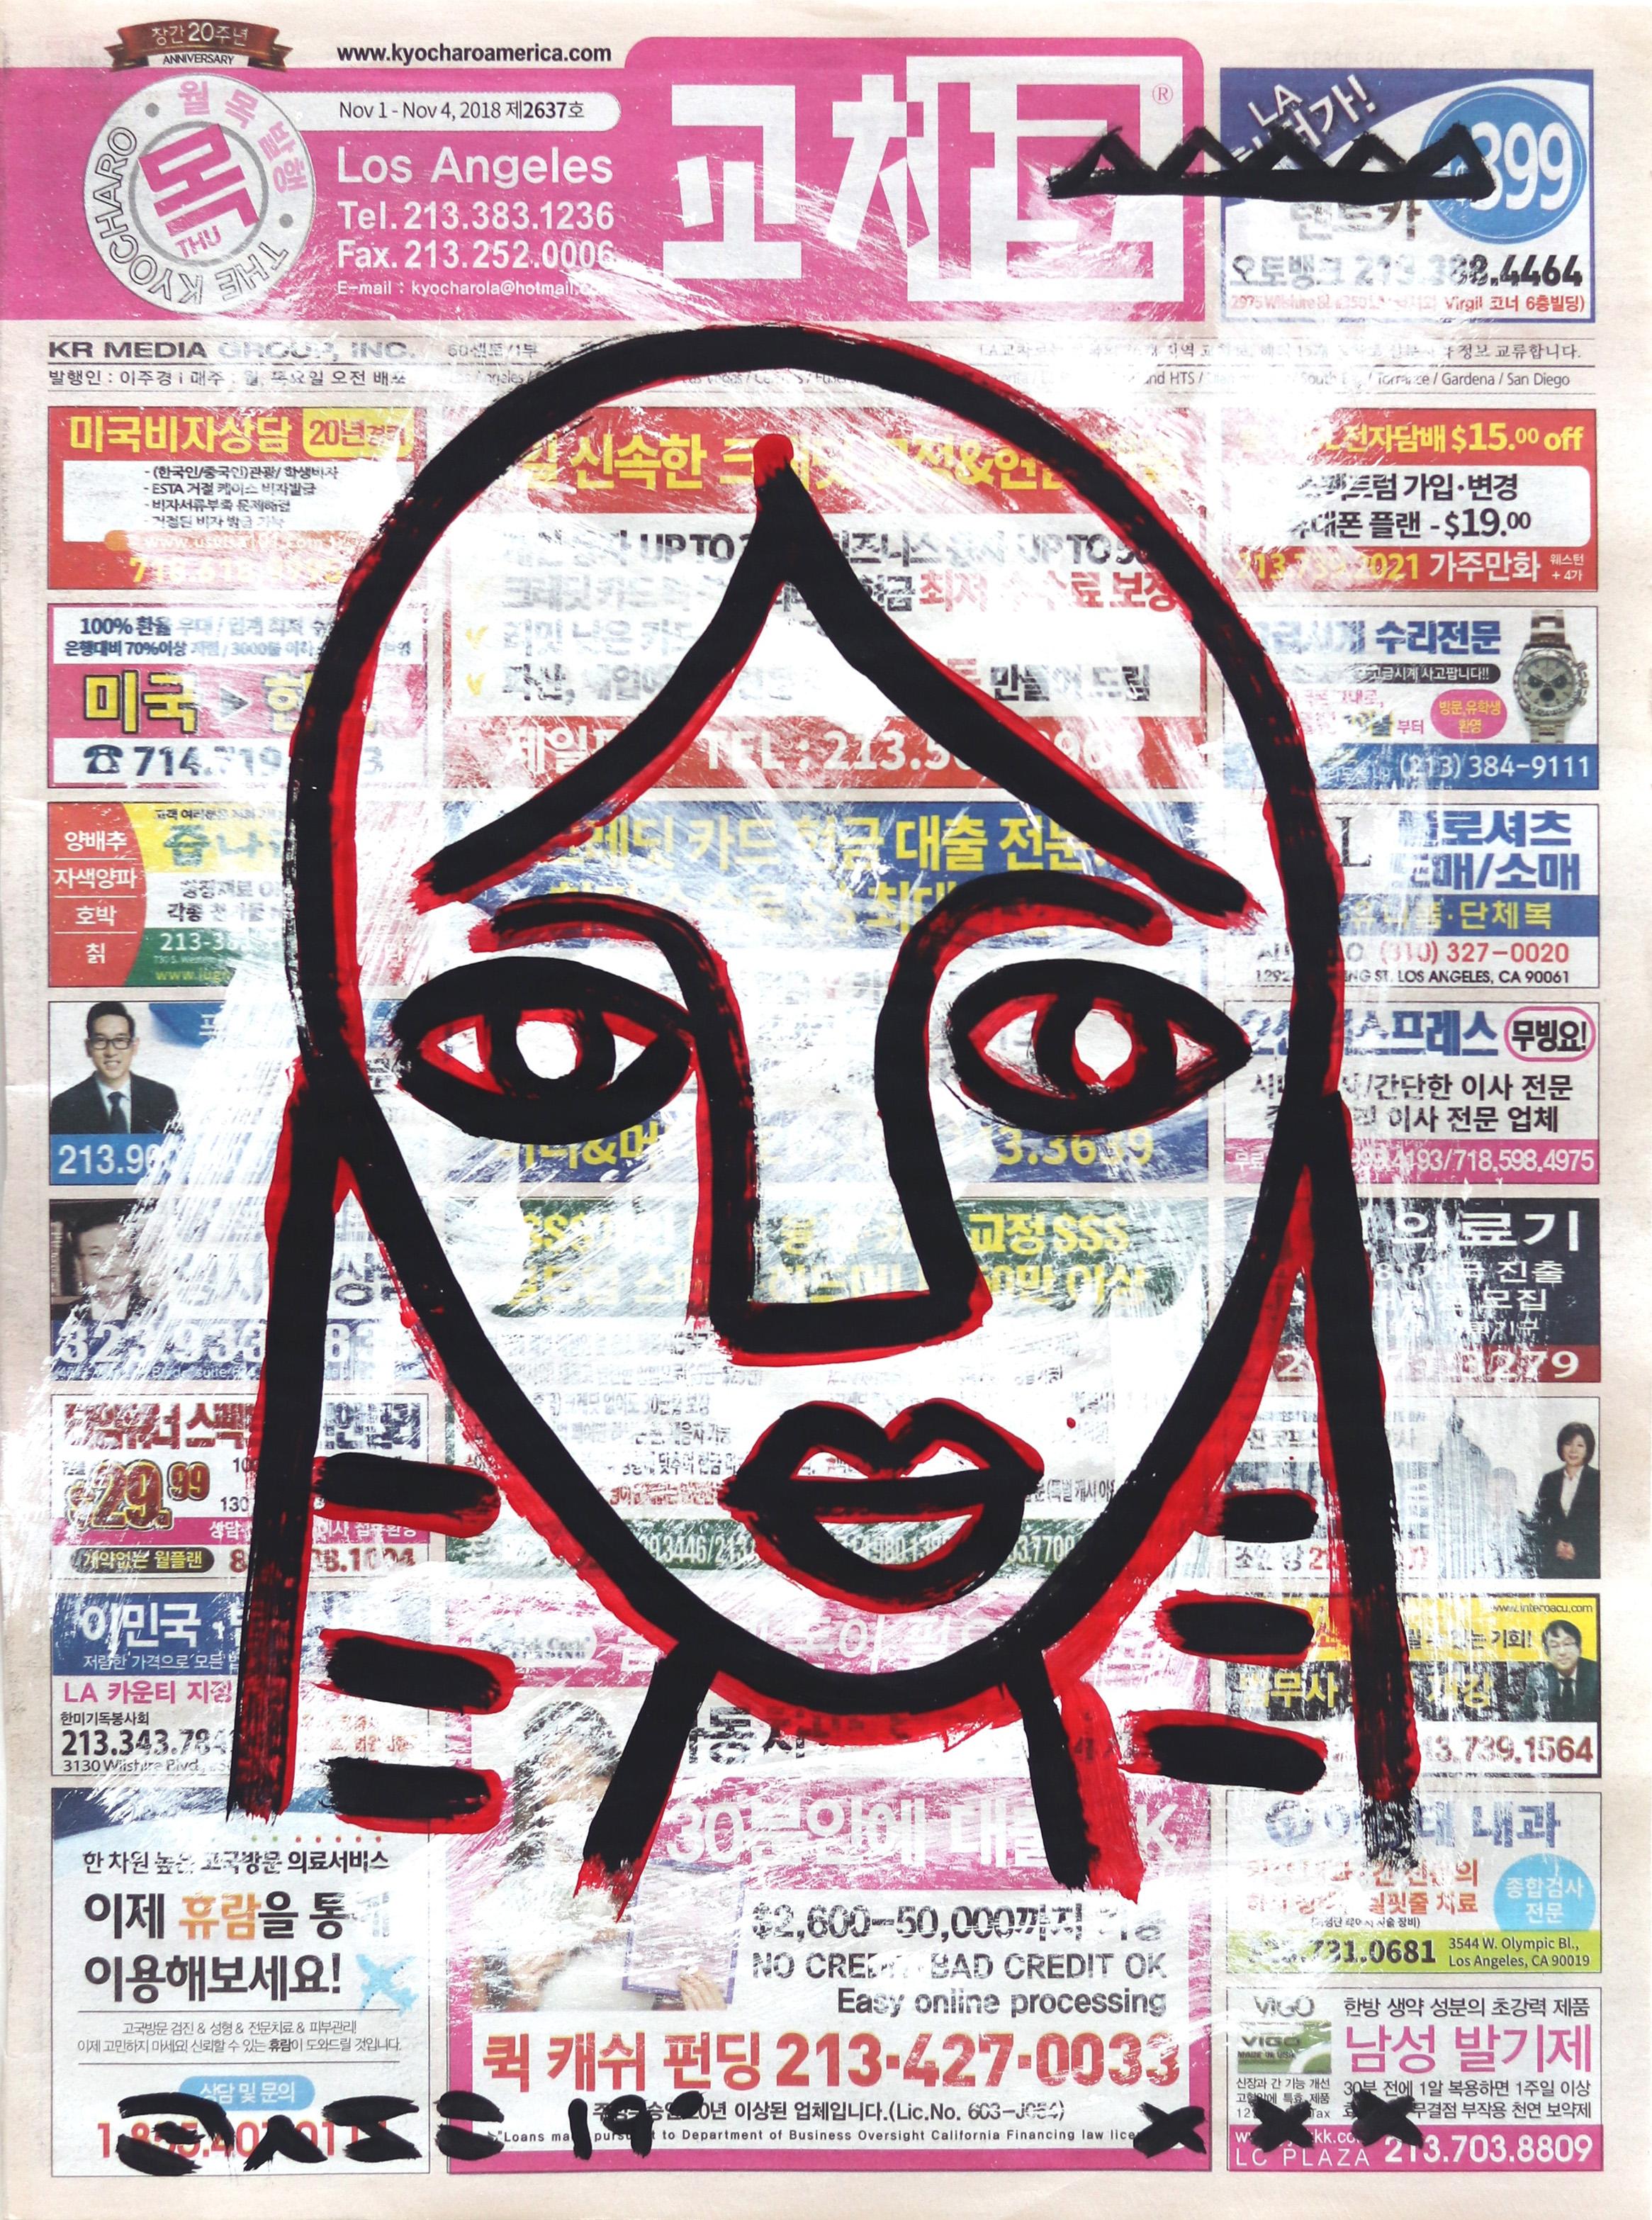 Gary John Figurative Painting - The Portrait Of A Lady - Black and Red Original Street Art on Newspaper 